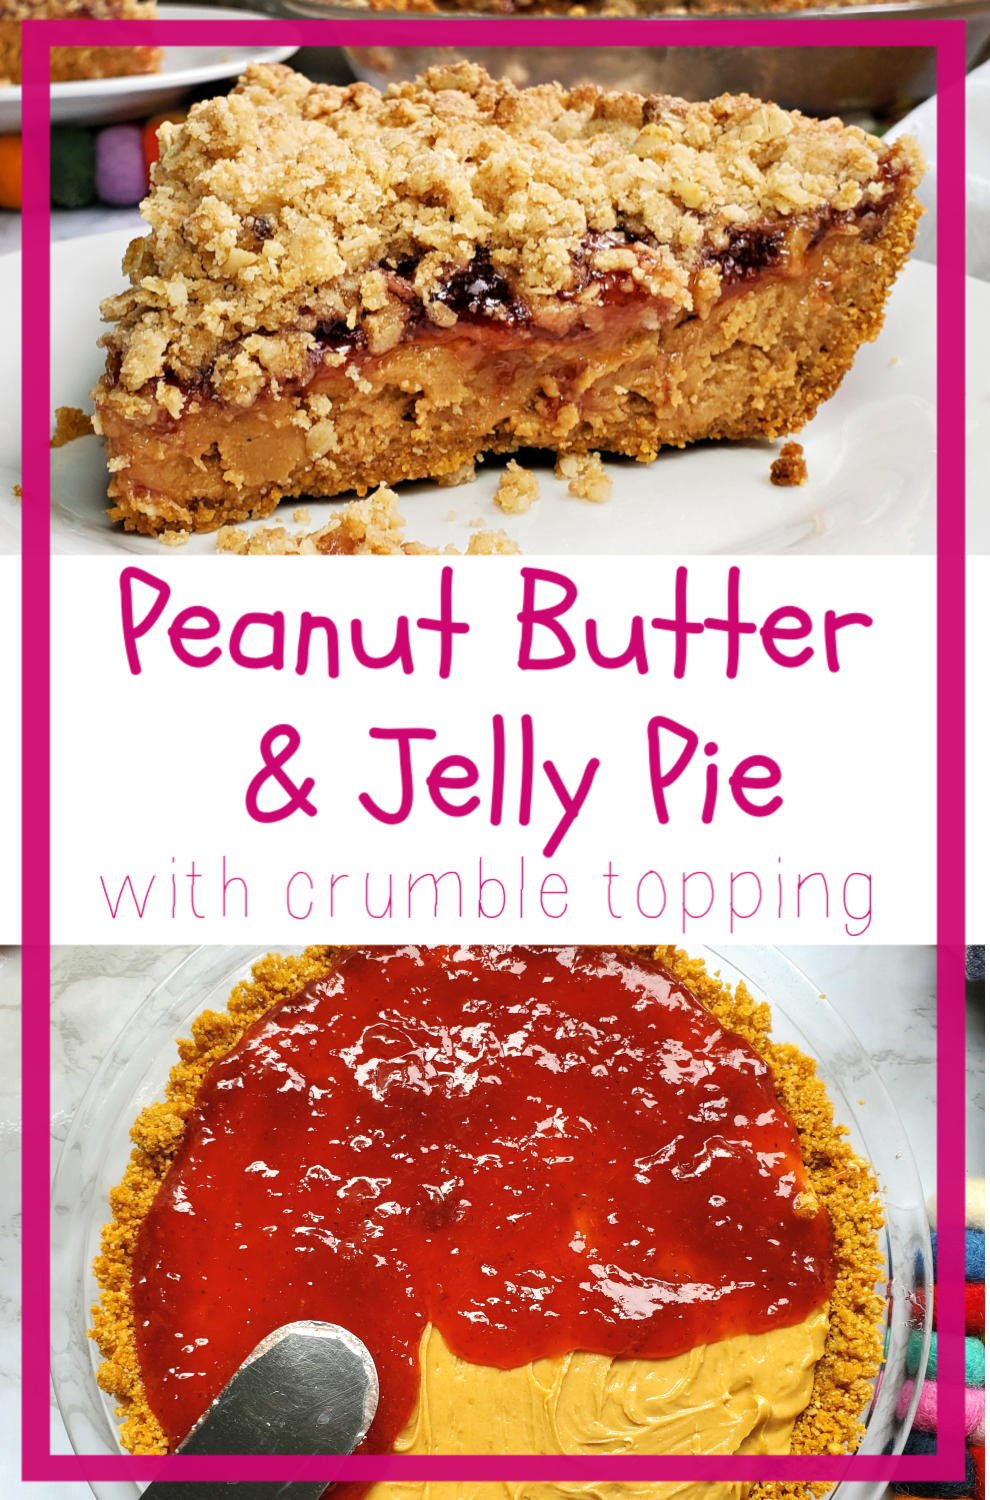 Peanut Butter & Jelly baked into a pie! Creamy peanut butter filling is sandwiched between a layer of your favorite jam, graham crust, & crumble topping.